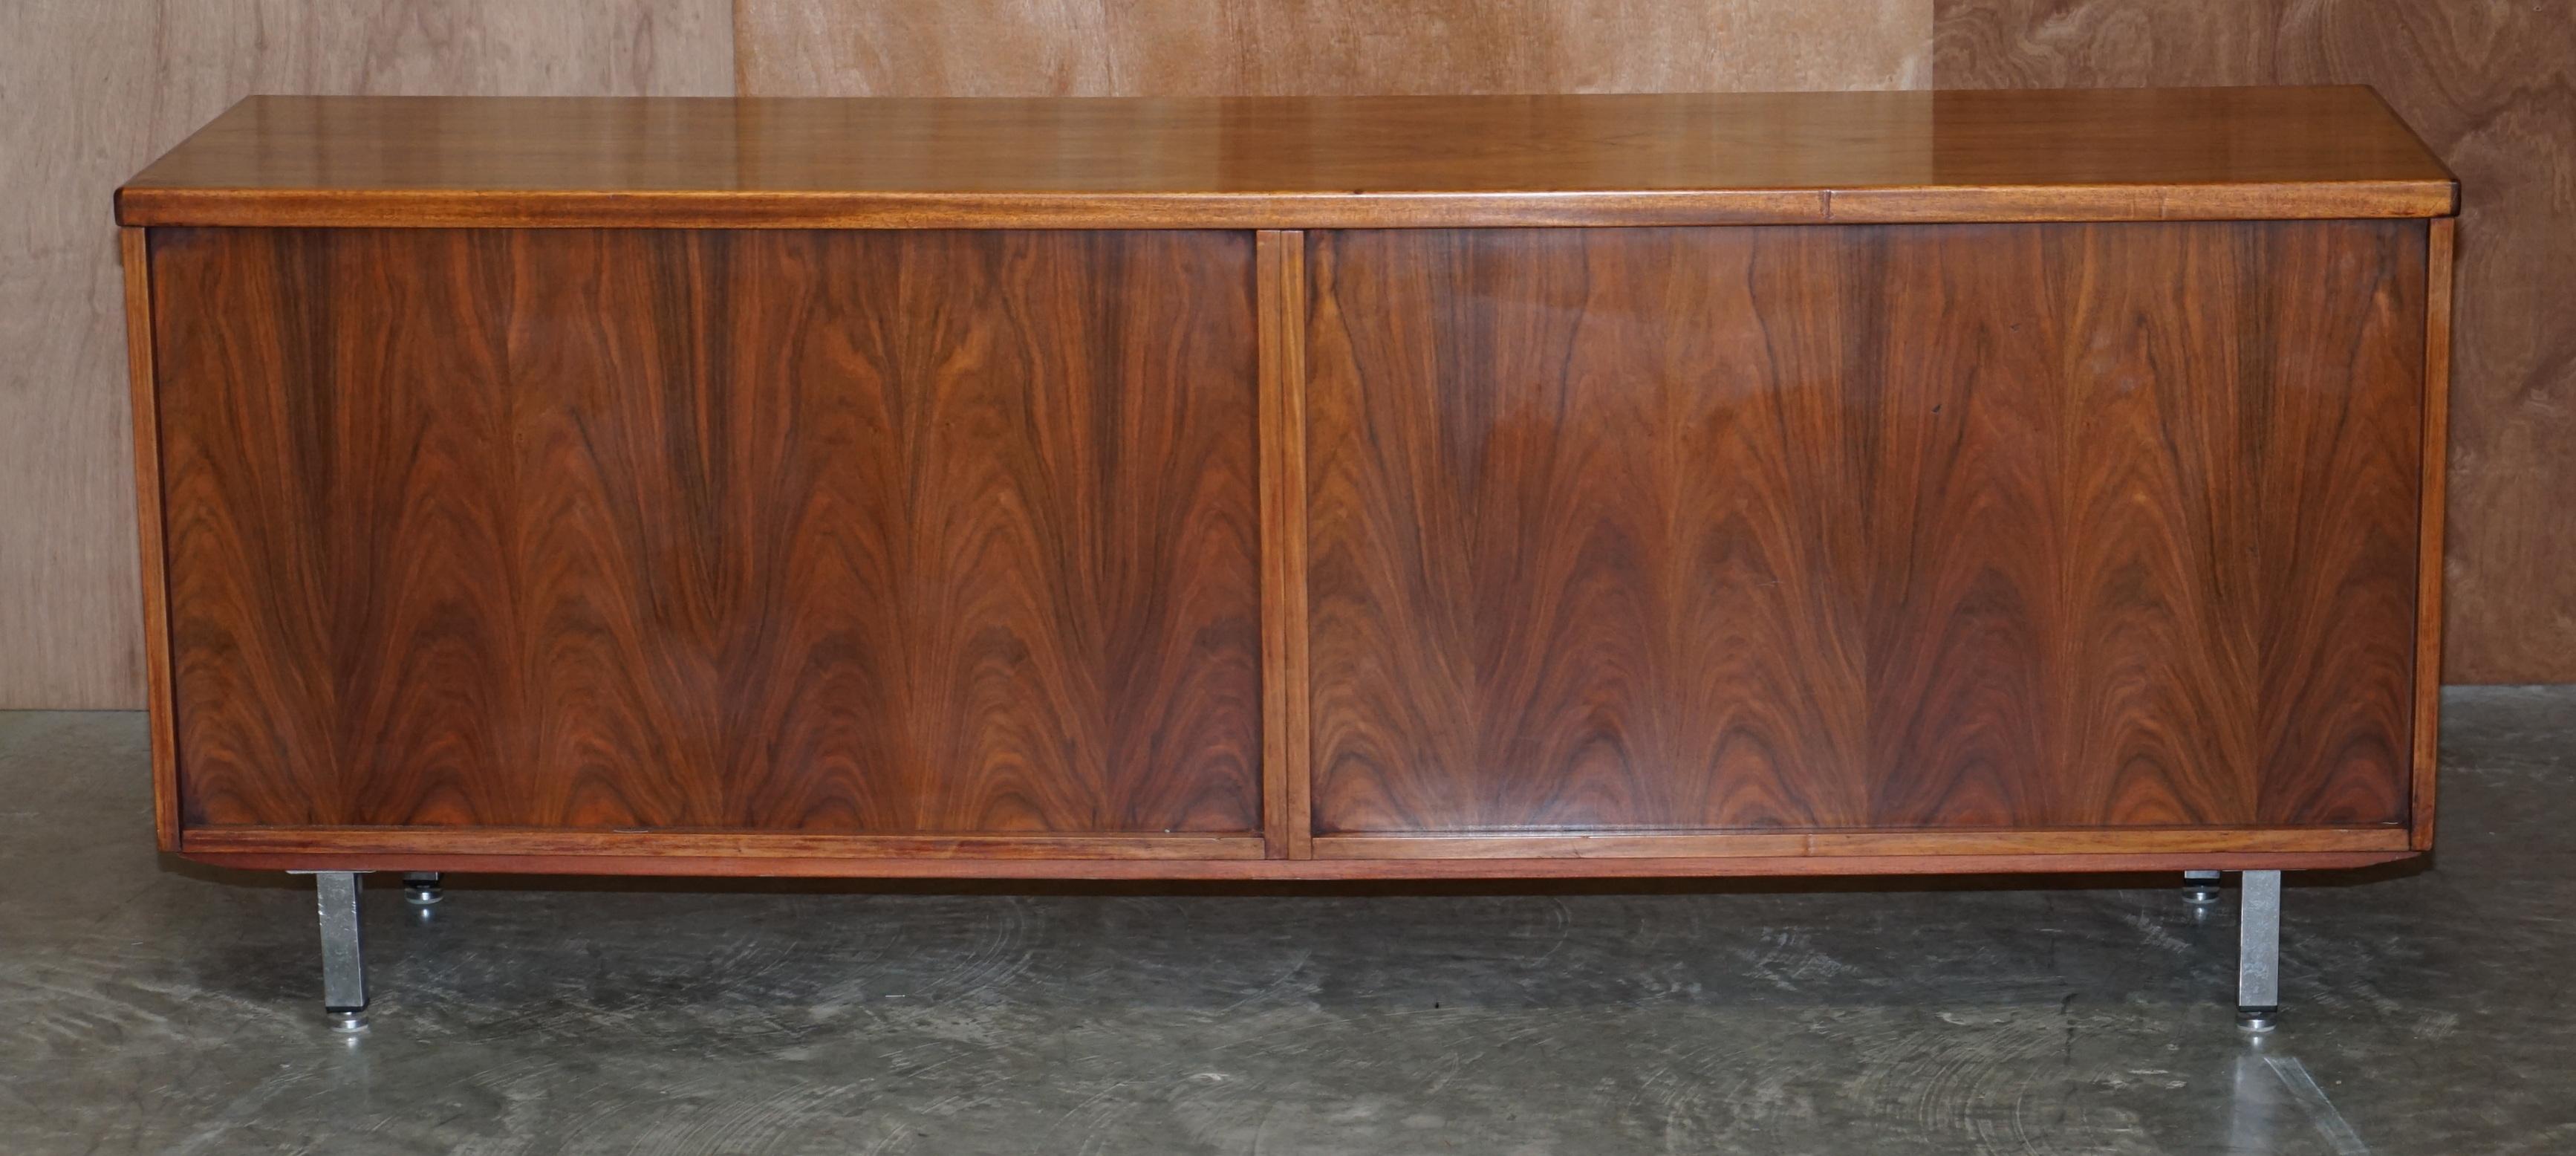 Stunning Restored Mid Century Modern Period Hardwood Sideboard with Chrome Legs For Sale 5